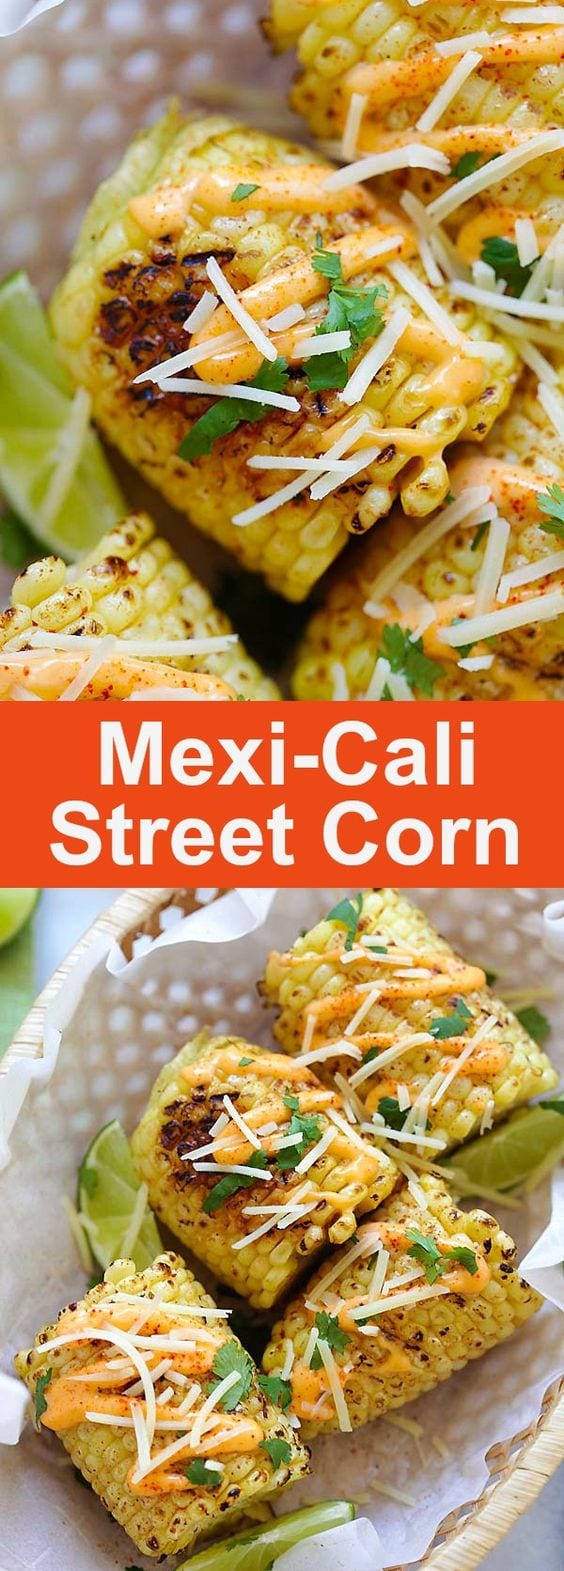 Mexi-Cali Street Corn – best Mexican street corn with Chipotle seasoning, spicy mayo, Parmesan cheese, lime and cilantro. So good | rasamalaysia.com